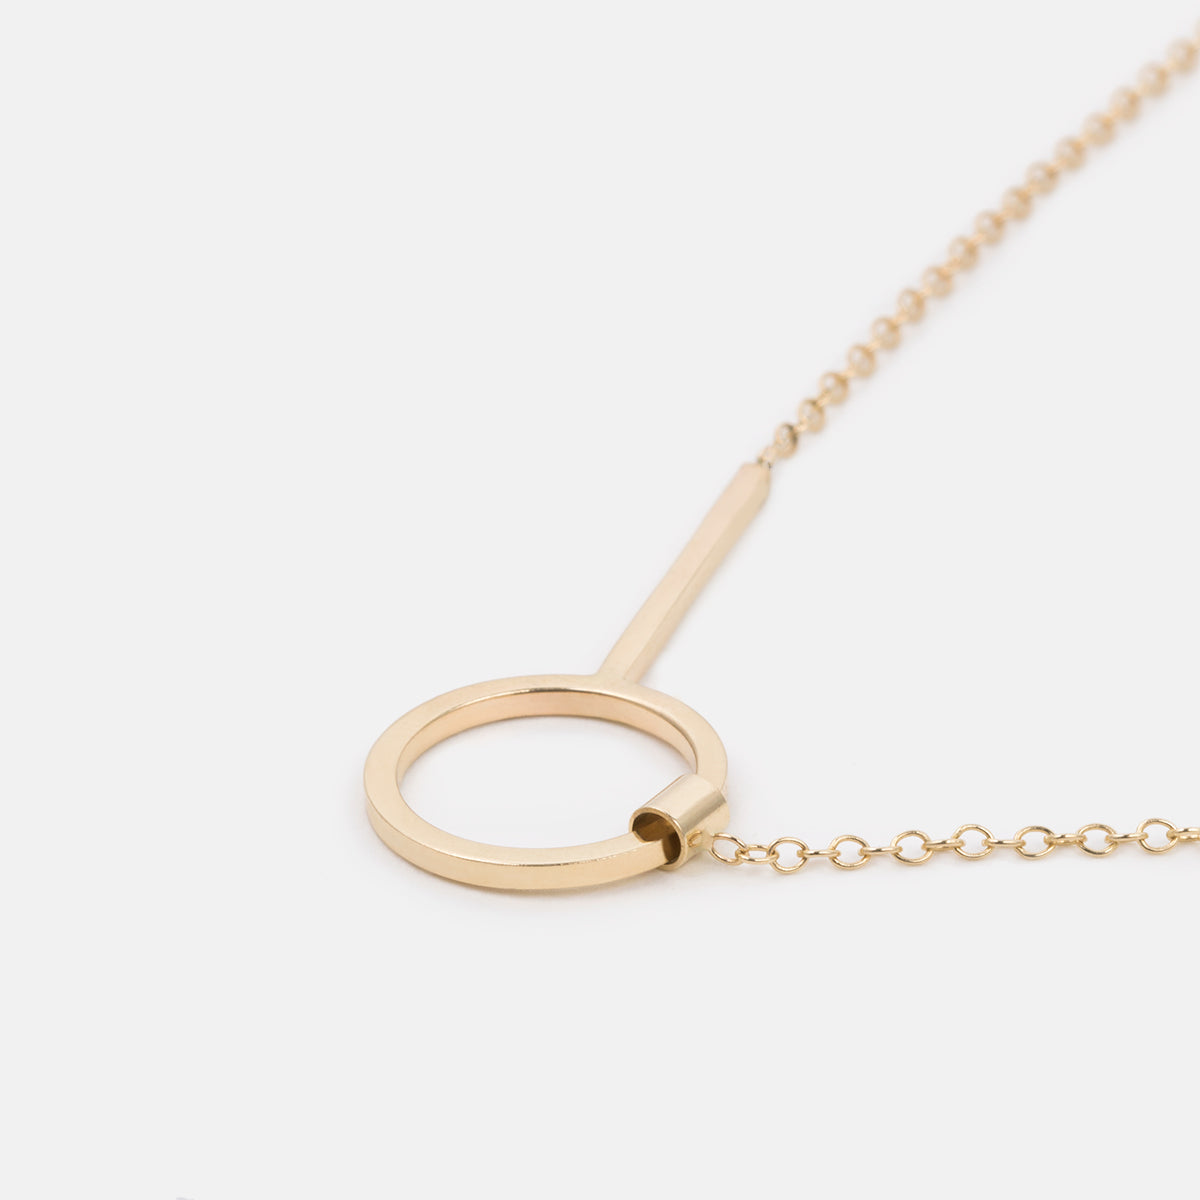 Diena Unique Necklace in 14k Gold By SHW Fine Jewelry NYC